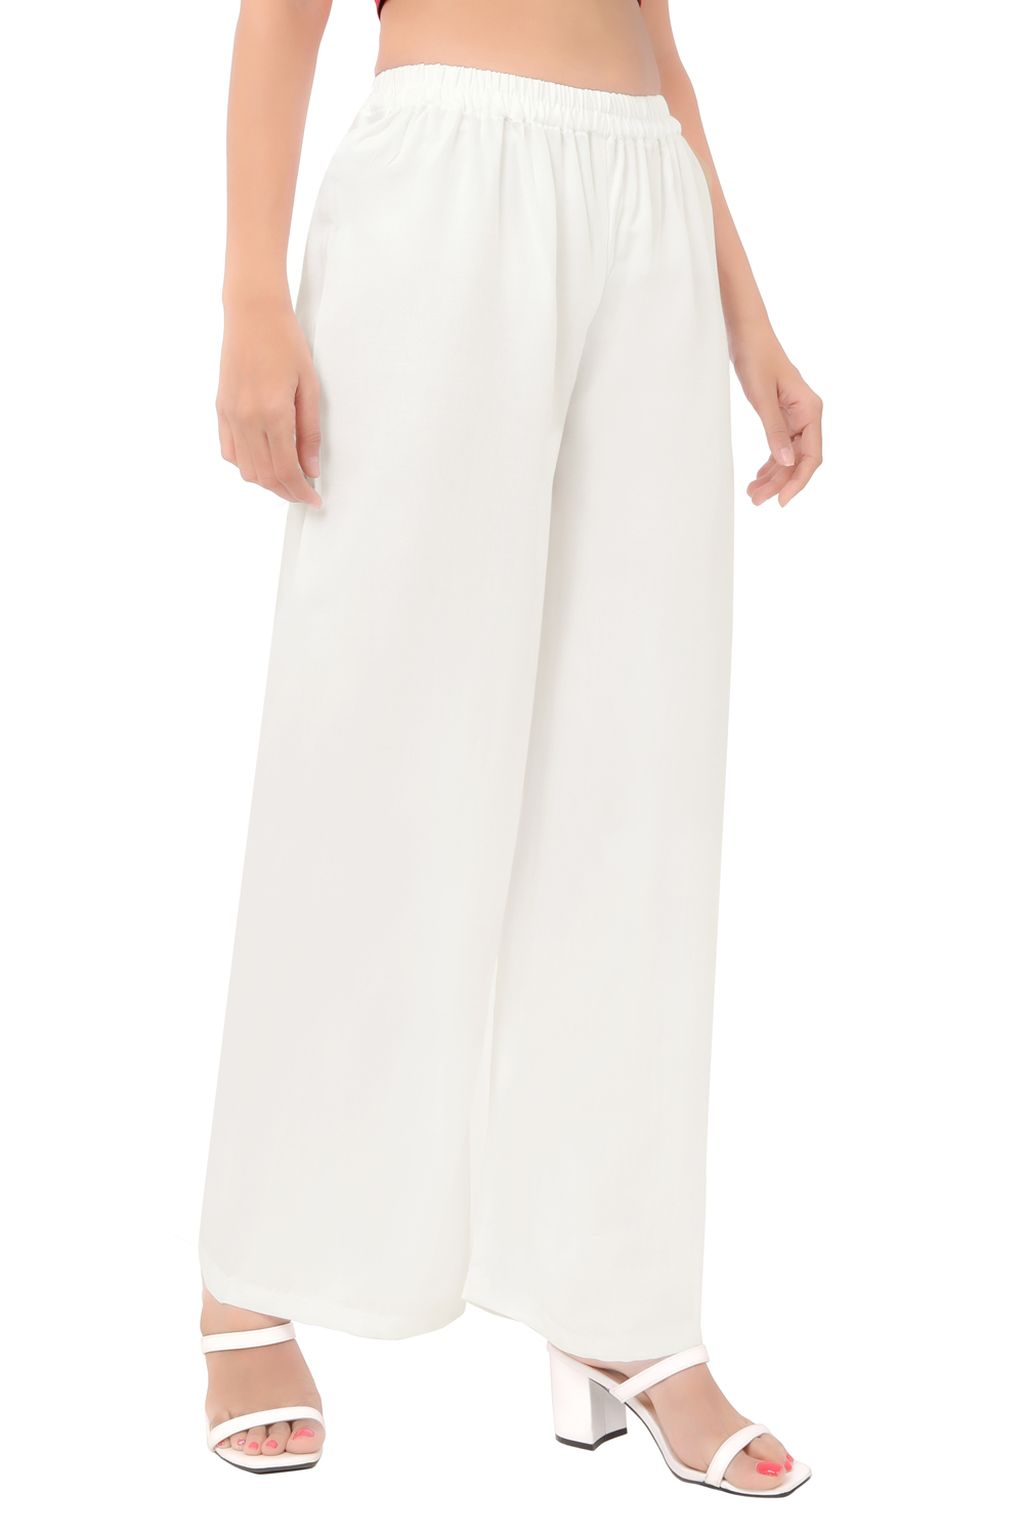 Buy Women's Rayon White Palazzo Pants with Single Lace - Relaxed Fit (XS)  at Amazon.in